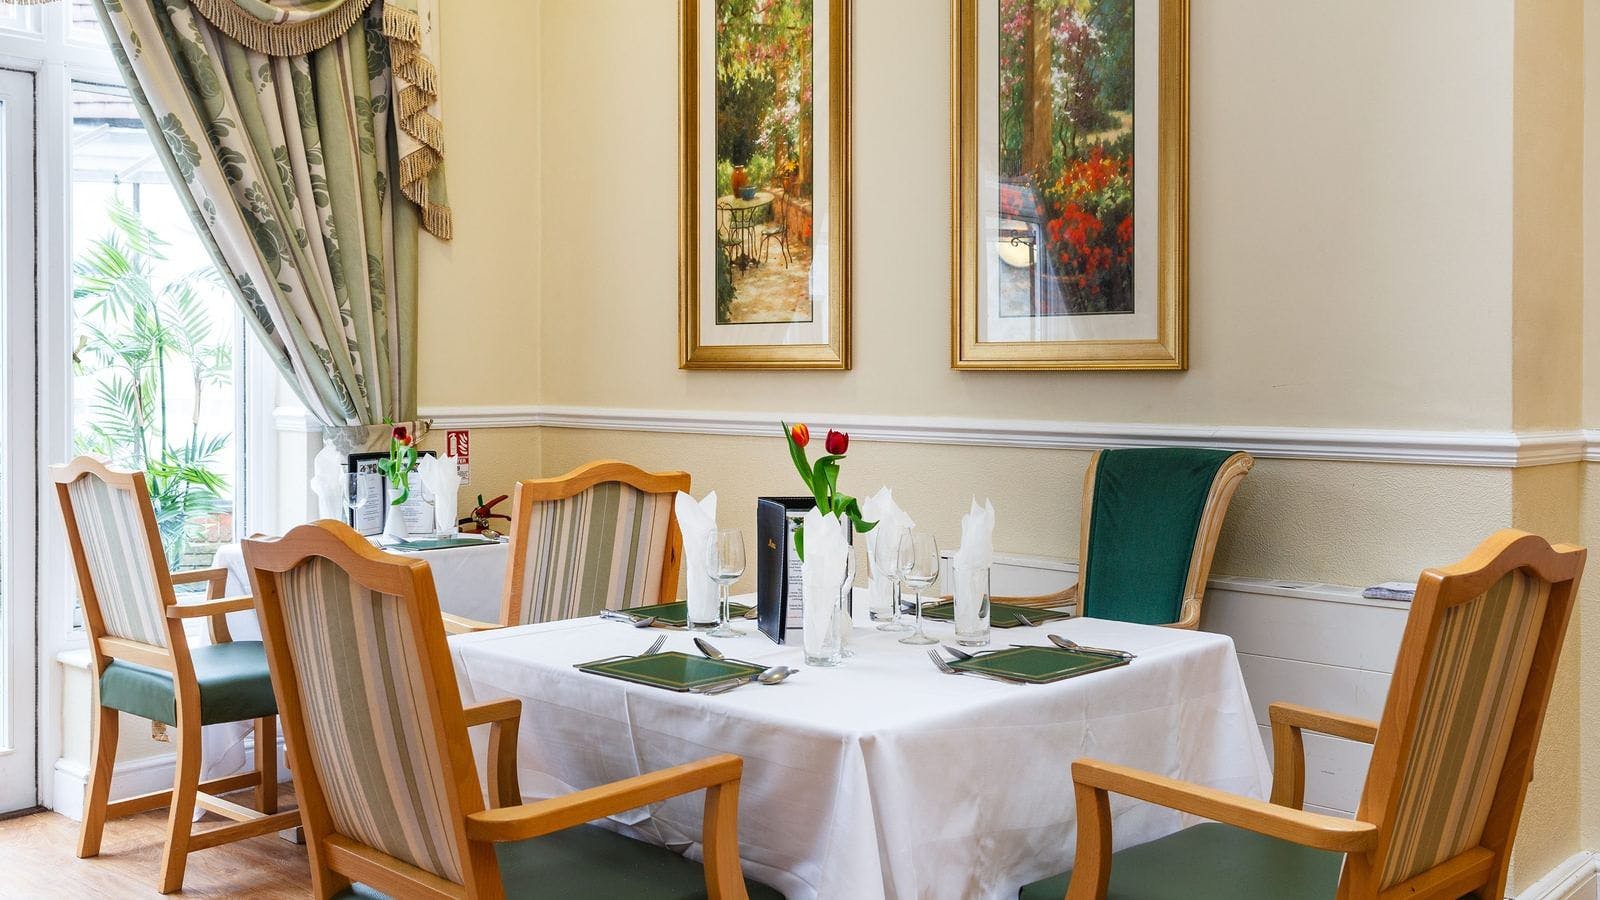 Dining Room at The Pines Care Home in London, England